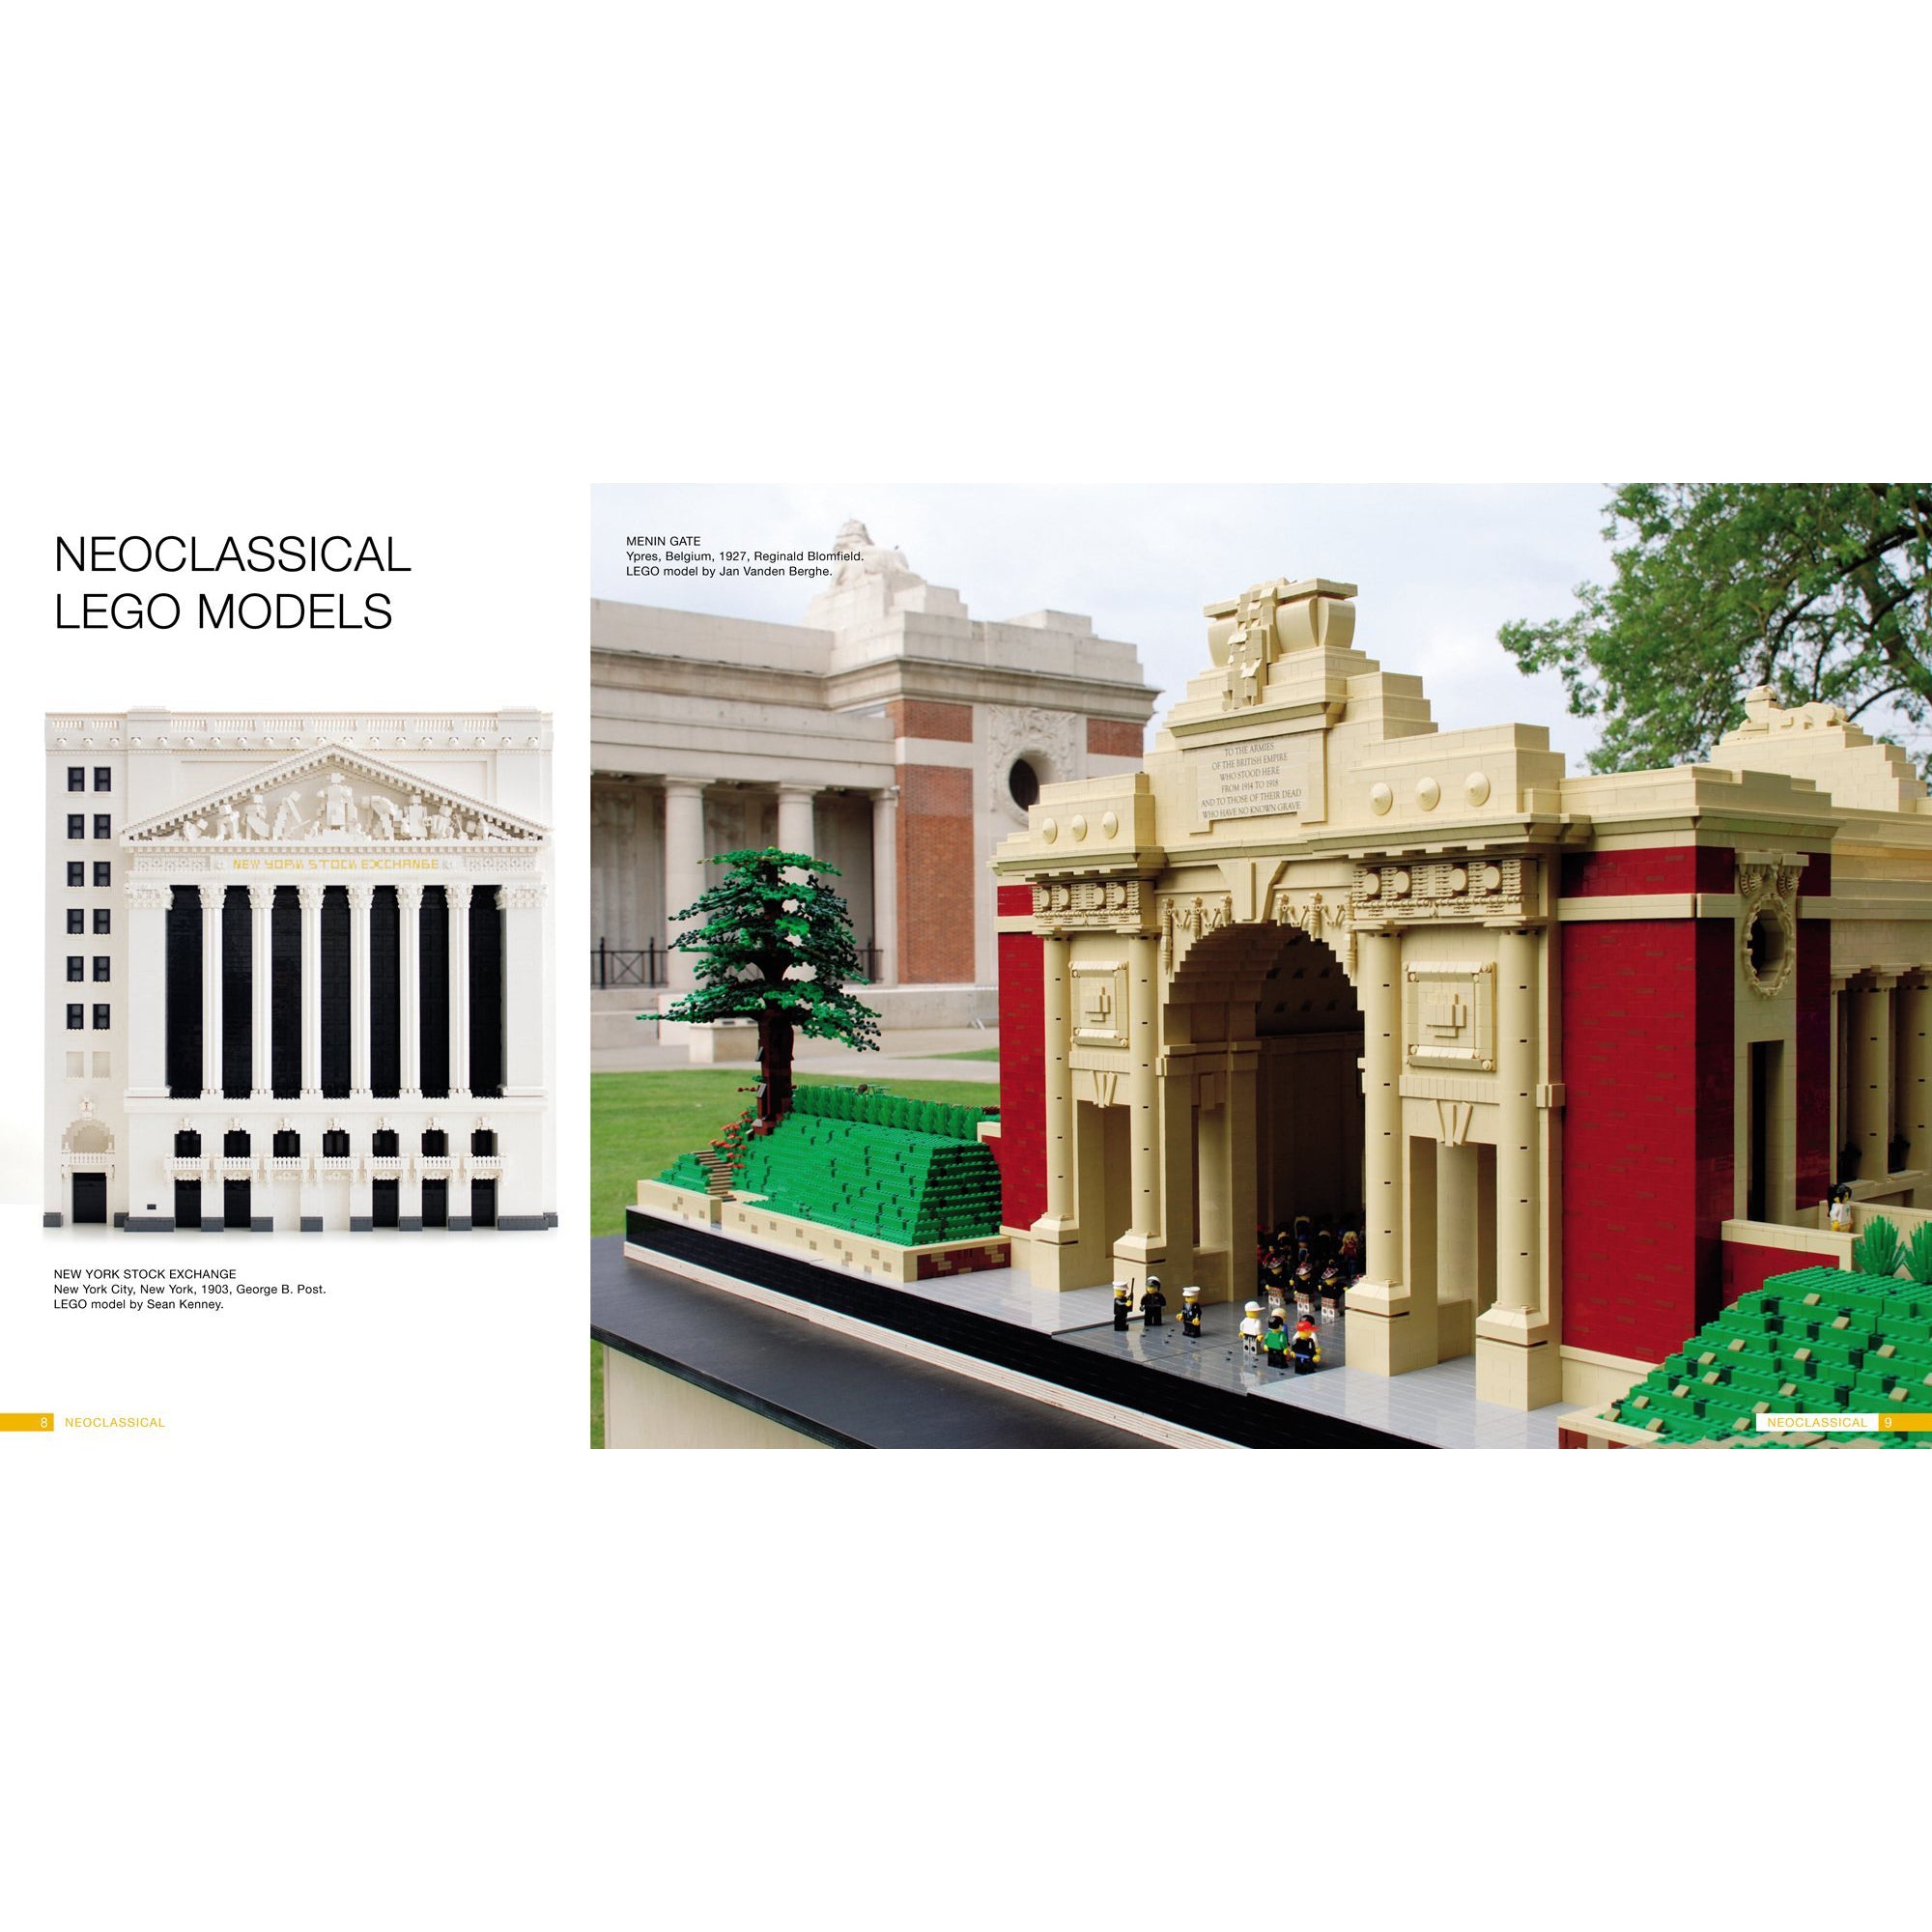 The LEGO - Getty Museum